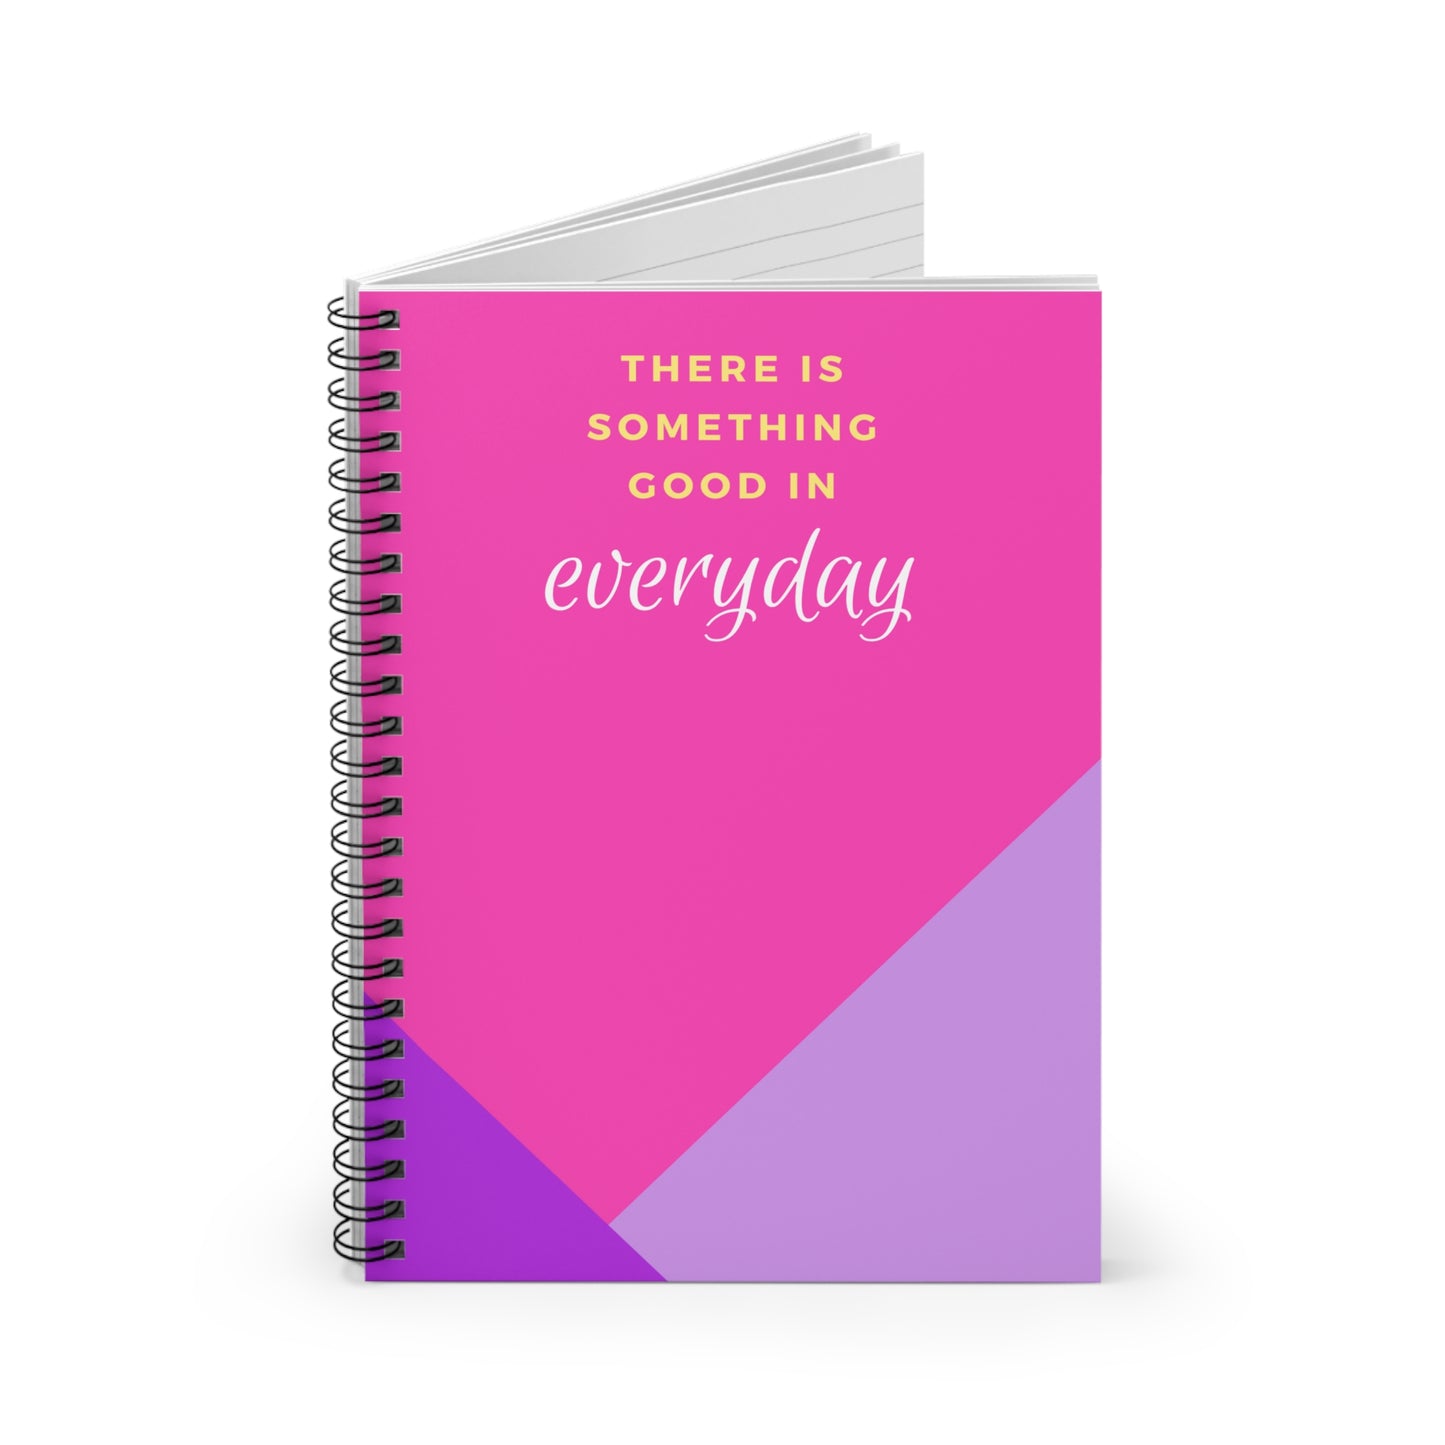 There's Something Good in Everyday Spiral Notebook